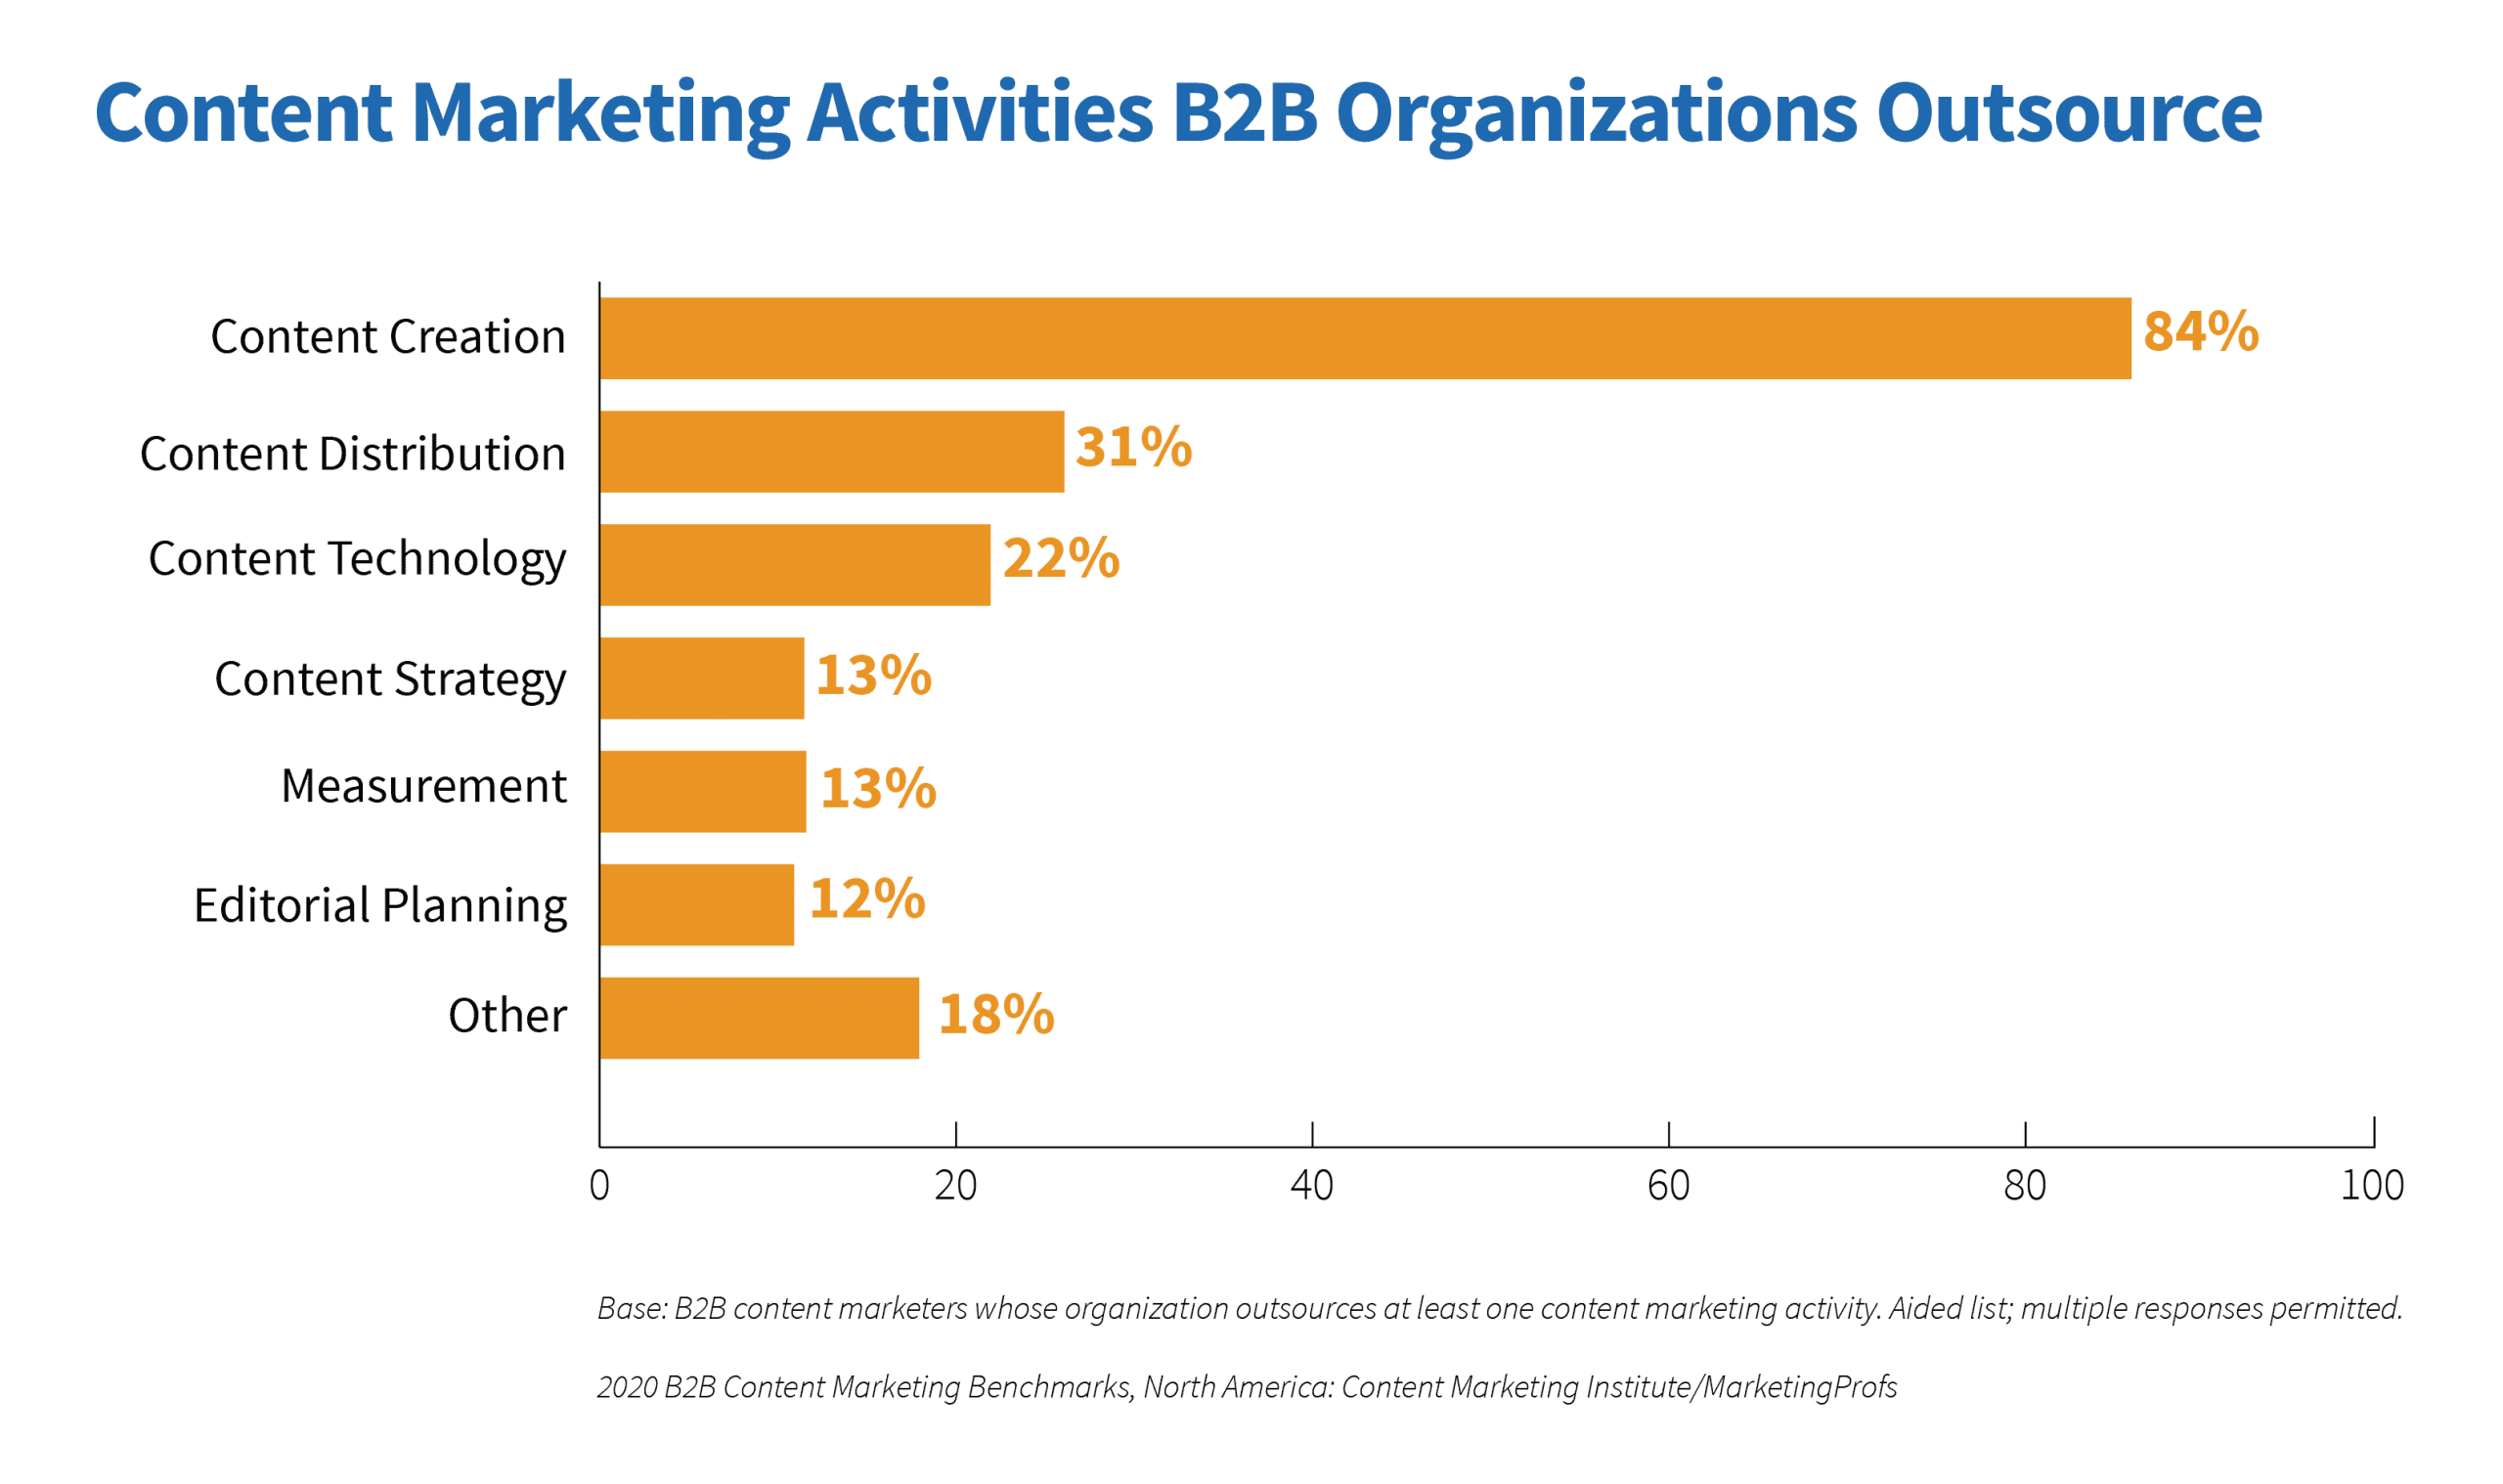 bar graph shows that content creation is the most popular content marketing activity outsourced by B2B organizations